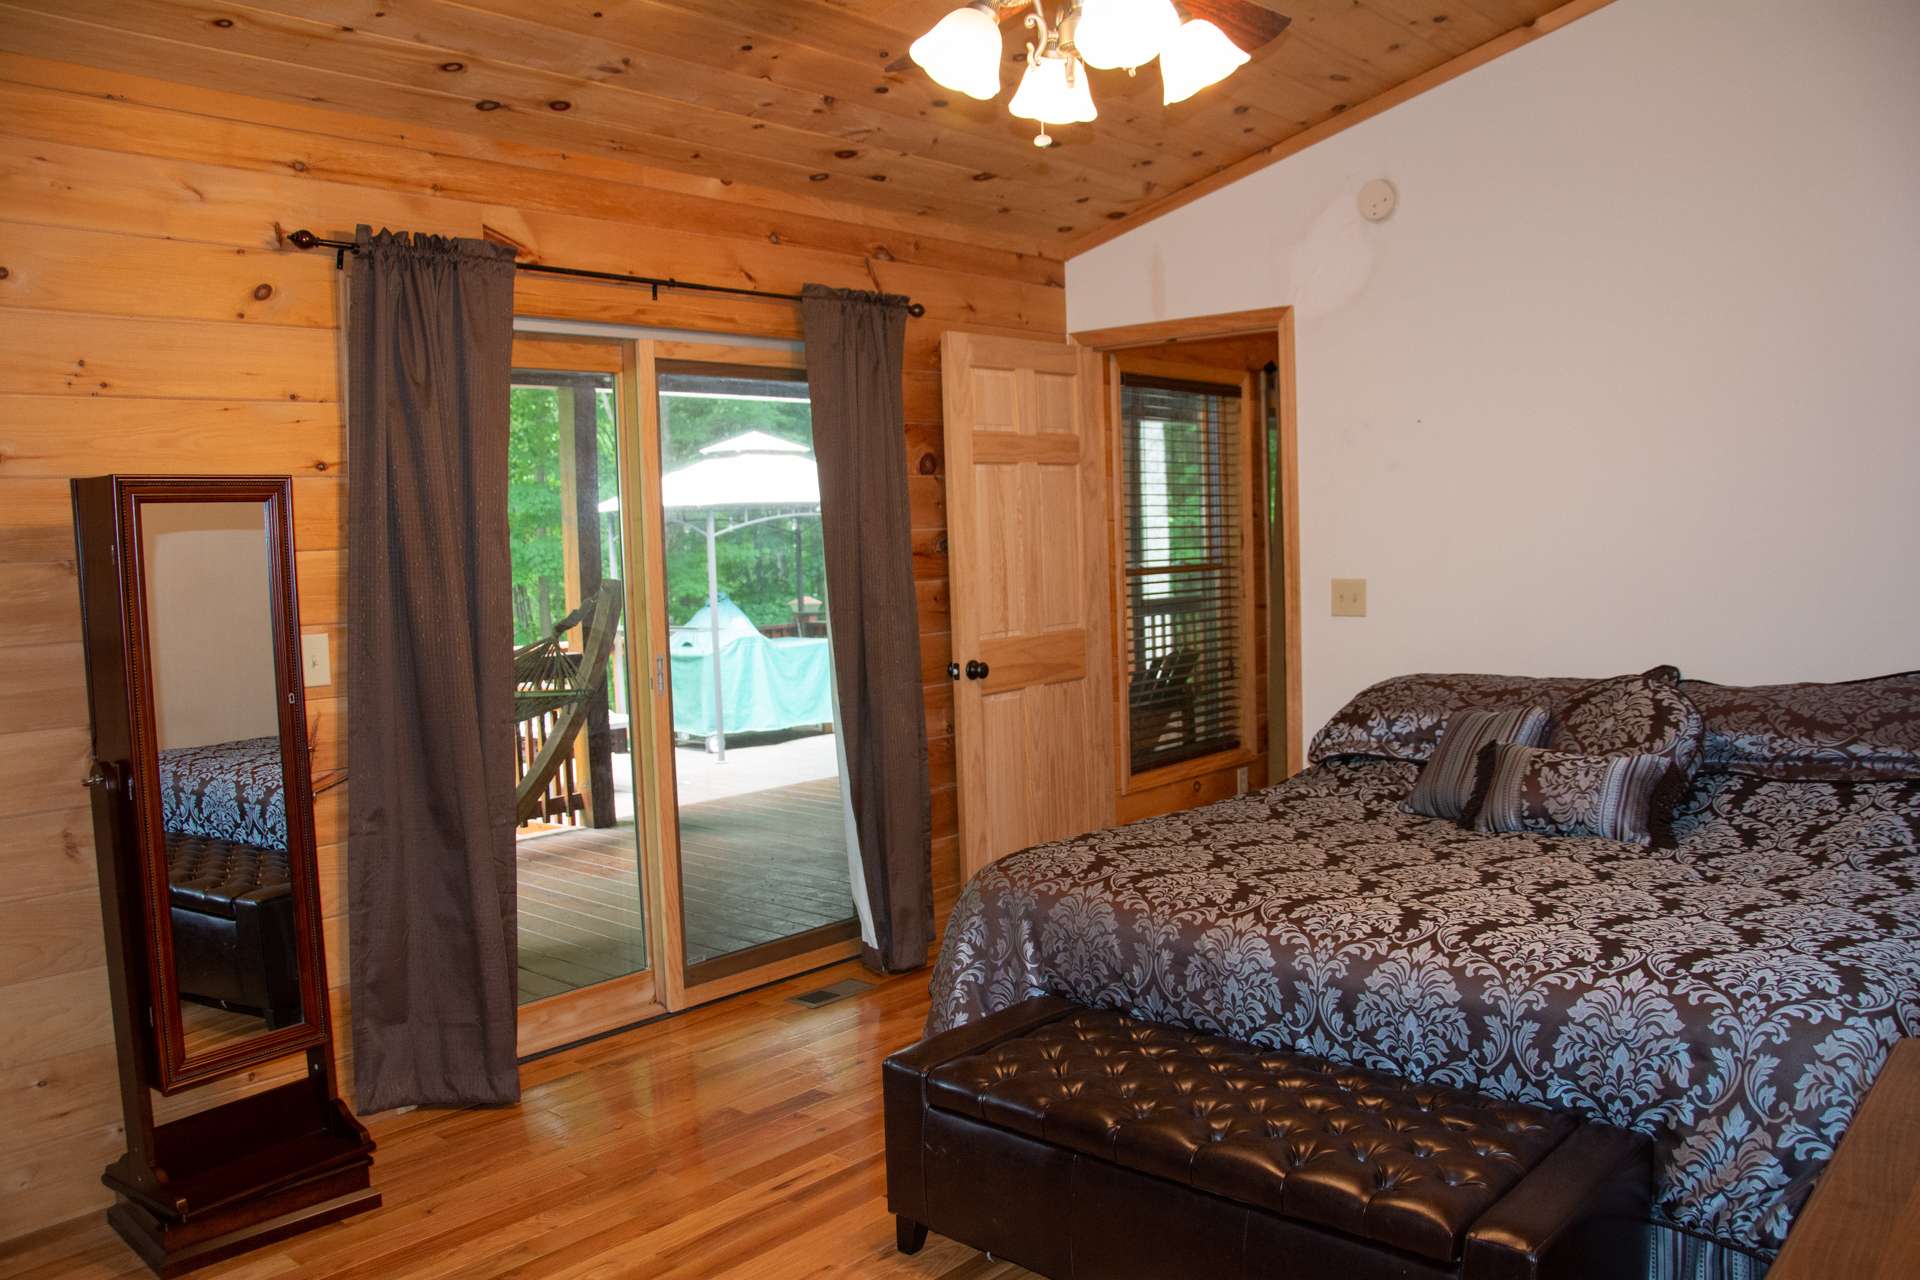 A split bedroom design gives the master suite more privacy and includes a walk-in closet,  a private bath, and access to the back deck .